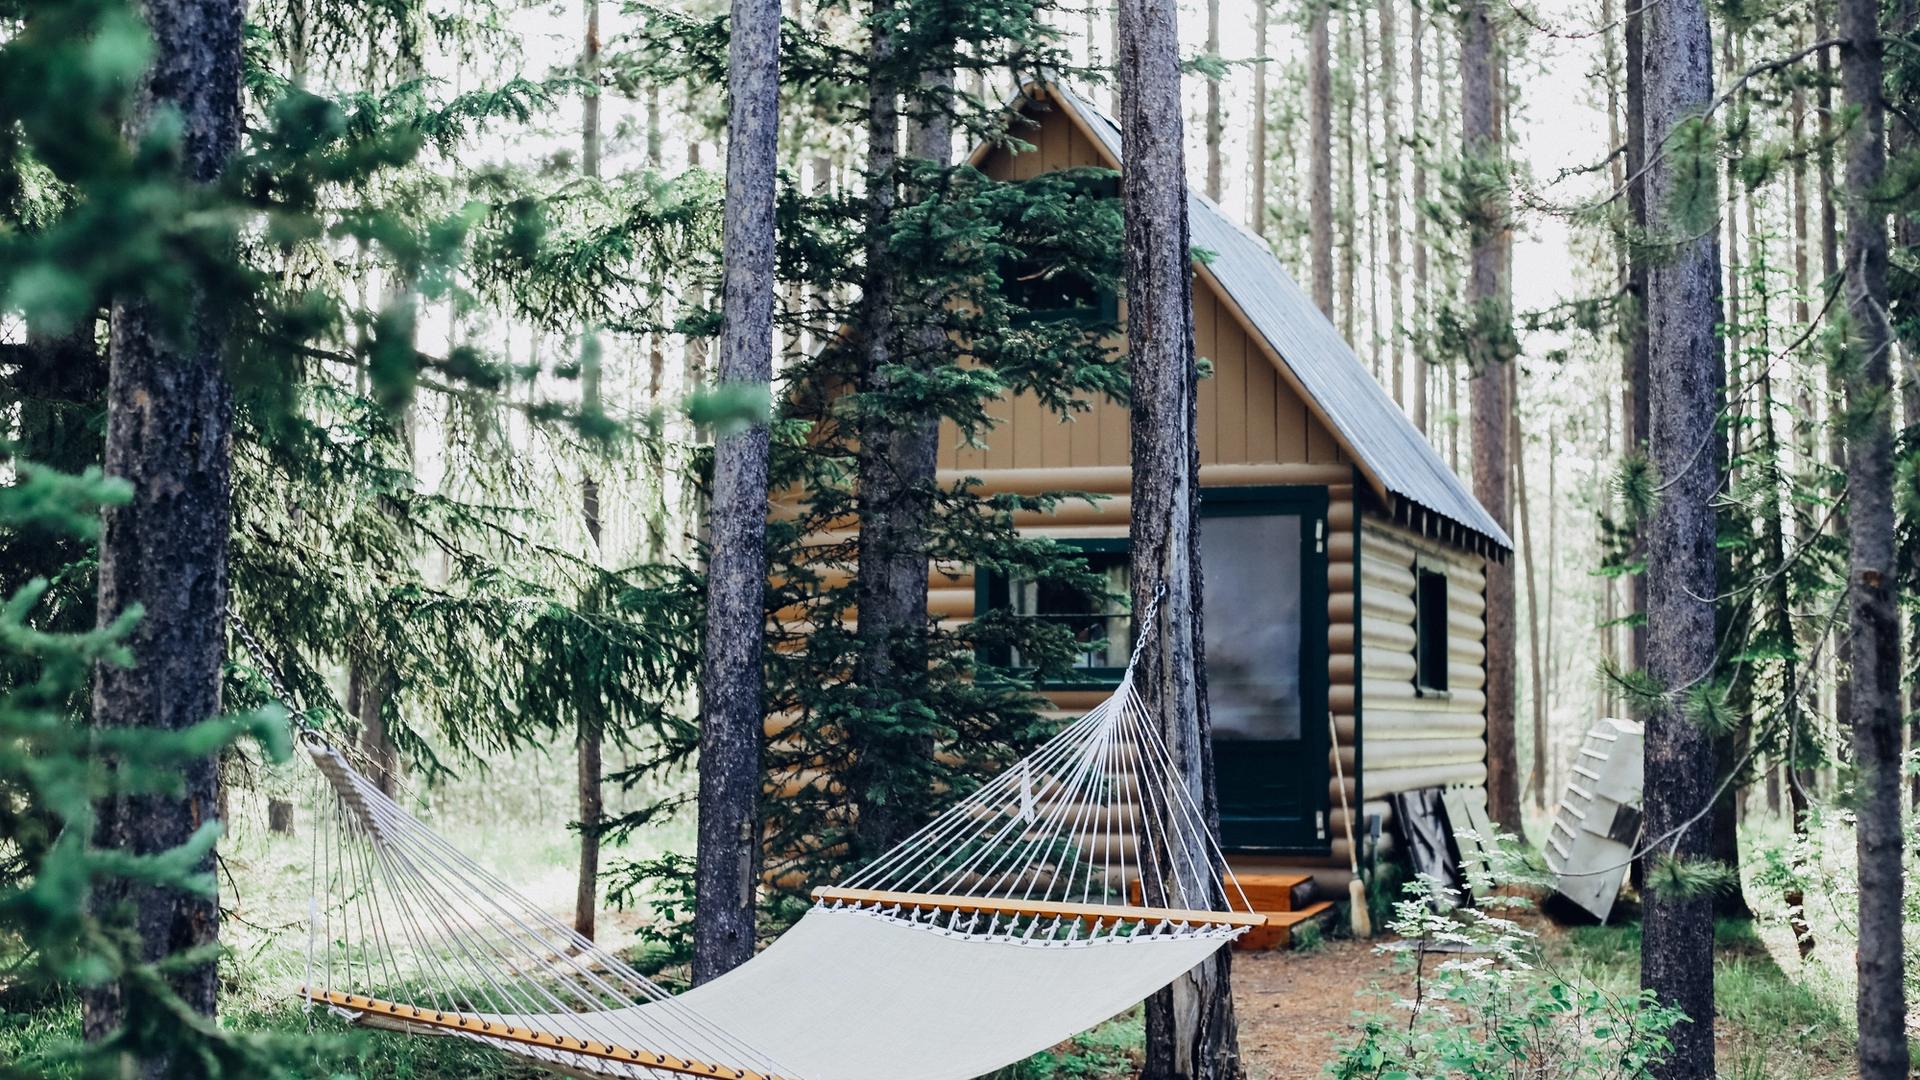 Lodge in forest with hammock in trees in the front